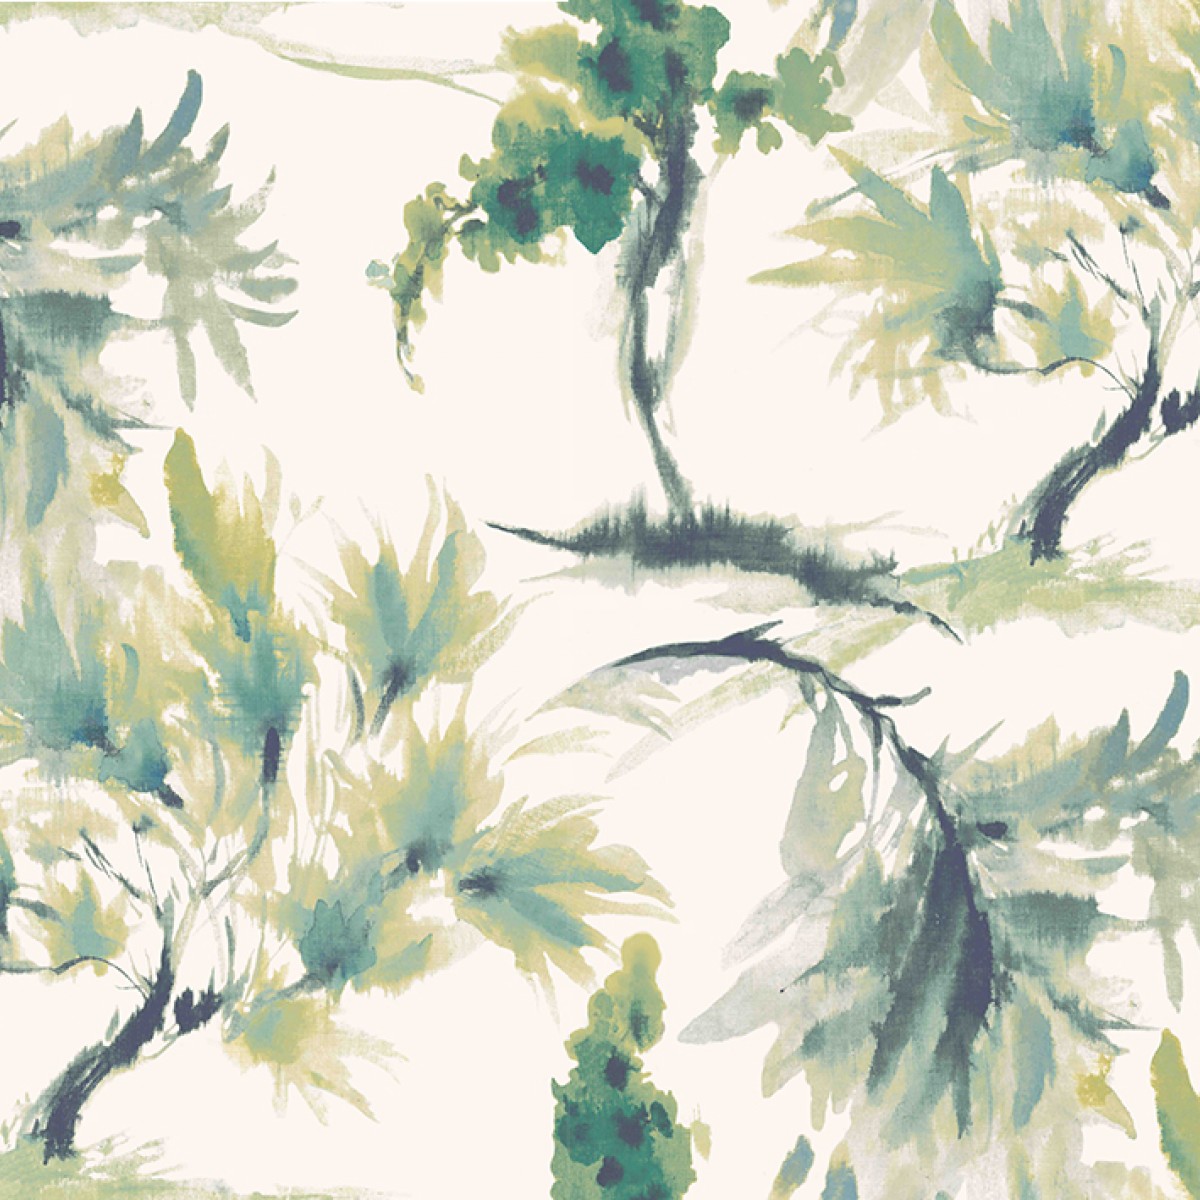 Tapet Mimosa, Olive Green Luxury Floral, 1838 Wallcoverings, 5.3mp / rola, Tapet living 